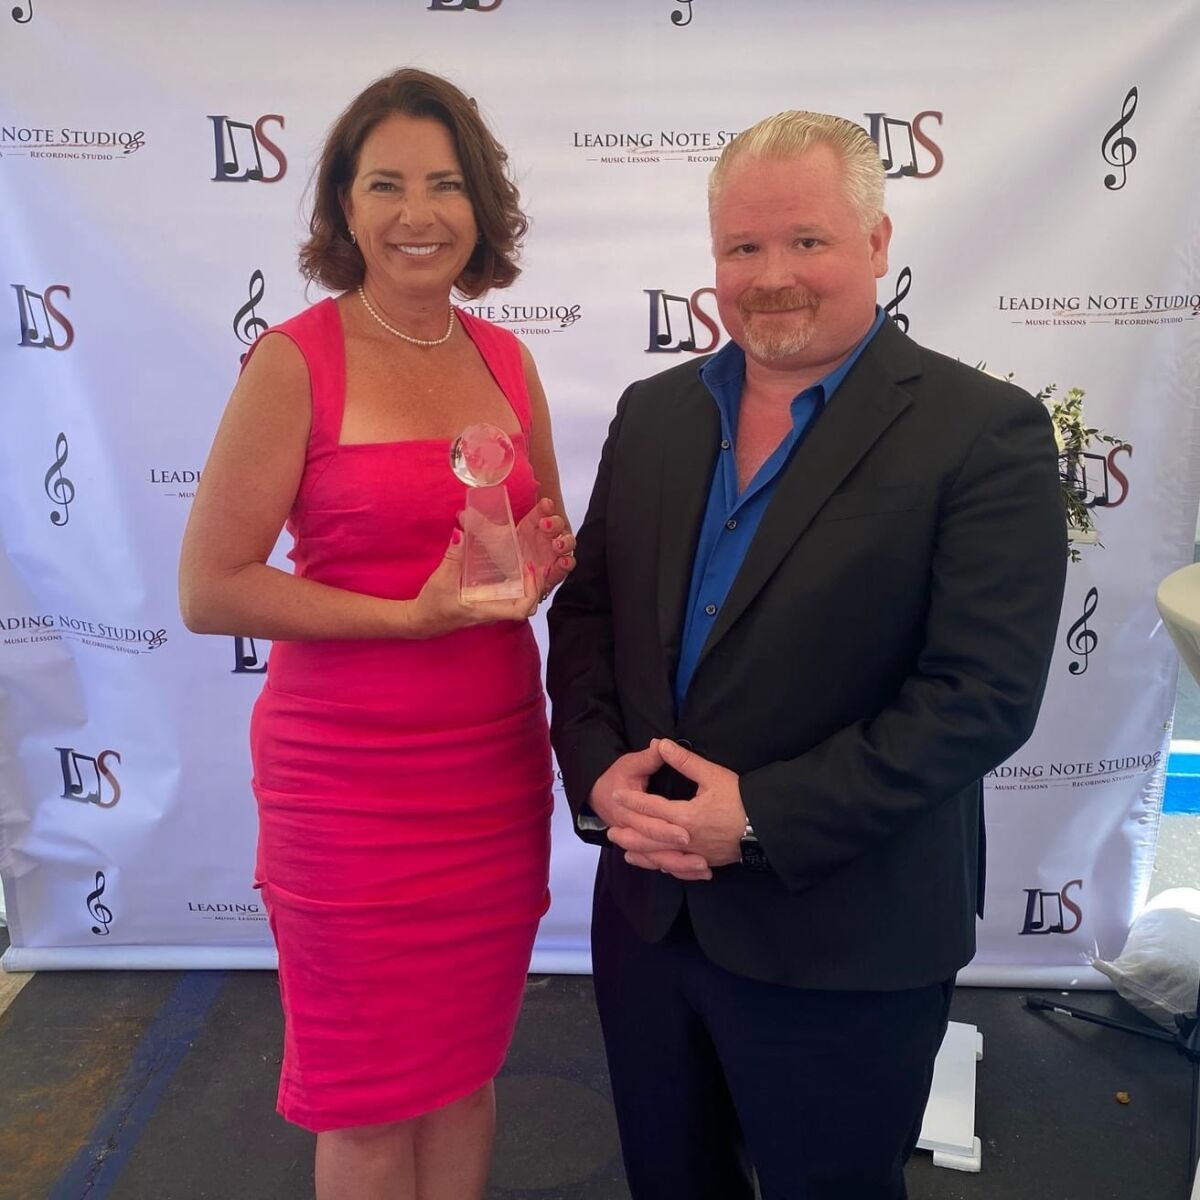 (L-R) Camille Hastings, owner of Leading Note Studios, with the LNS award presented March 22 by Marty Fort, director of MASS.